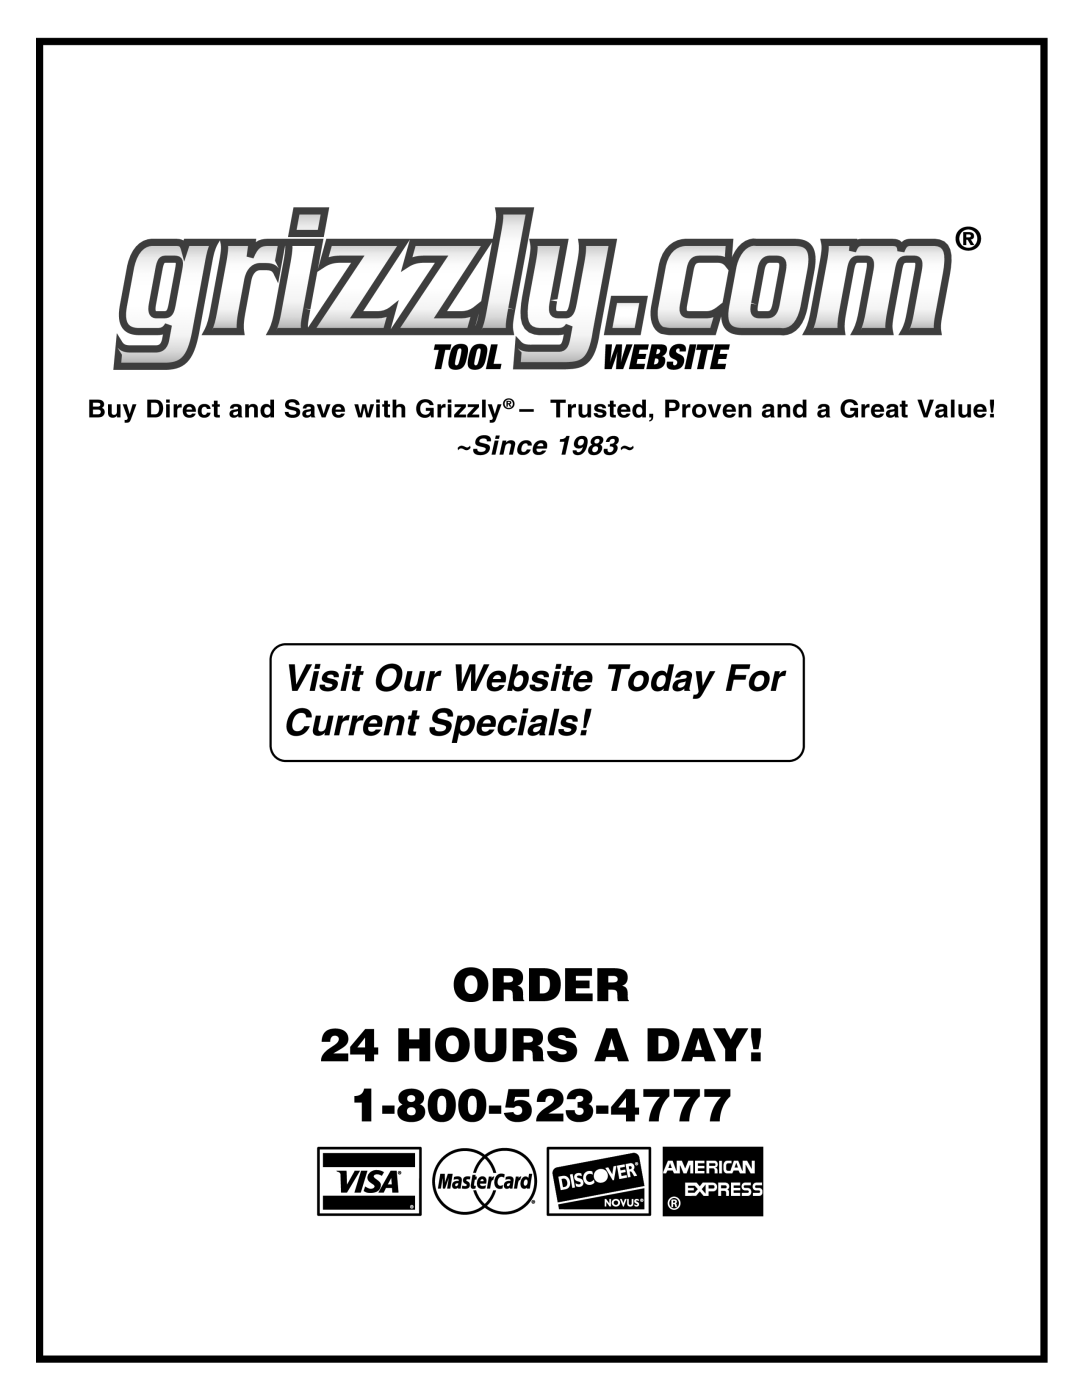 Grizzly G0484 ORDER 24 HOURS A DAY, Buy Direct and Save with Grizzly - Trusted, Proven and a Great Value, ~Since 1983~ 